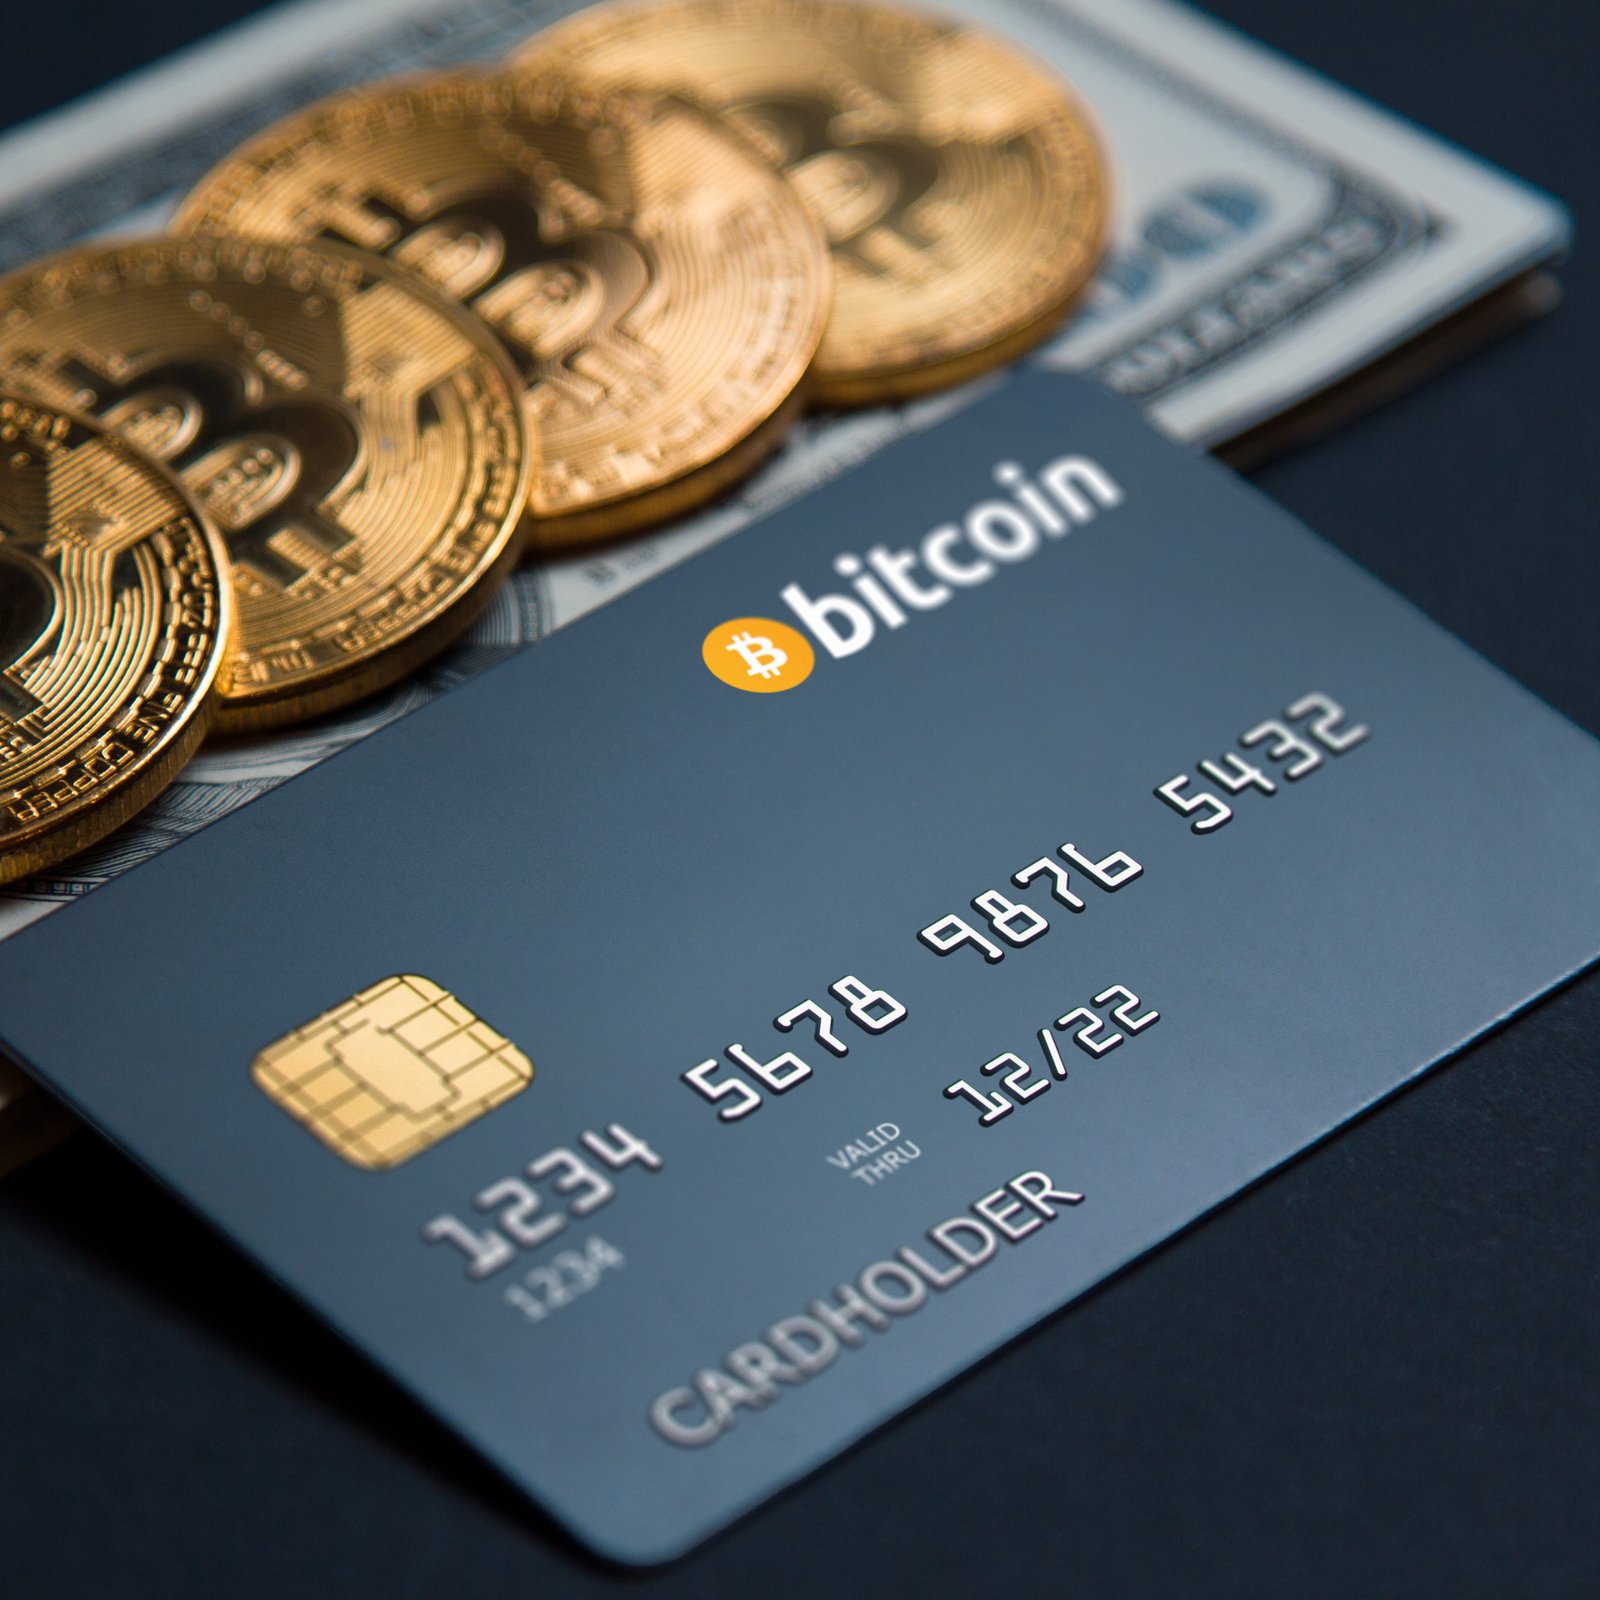 Btc bank cards best bitcoin trading exchange